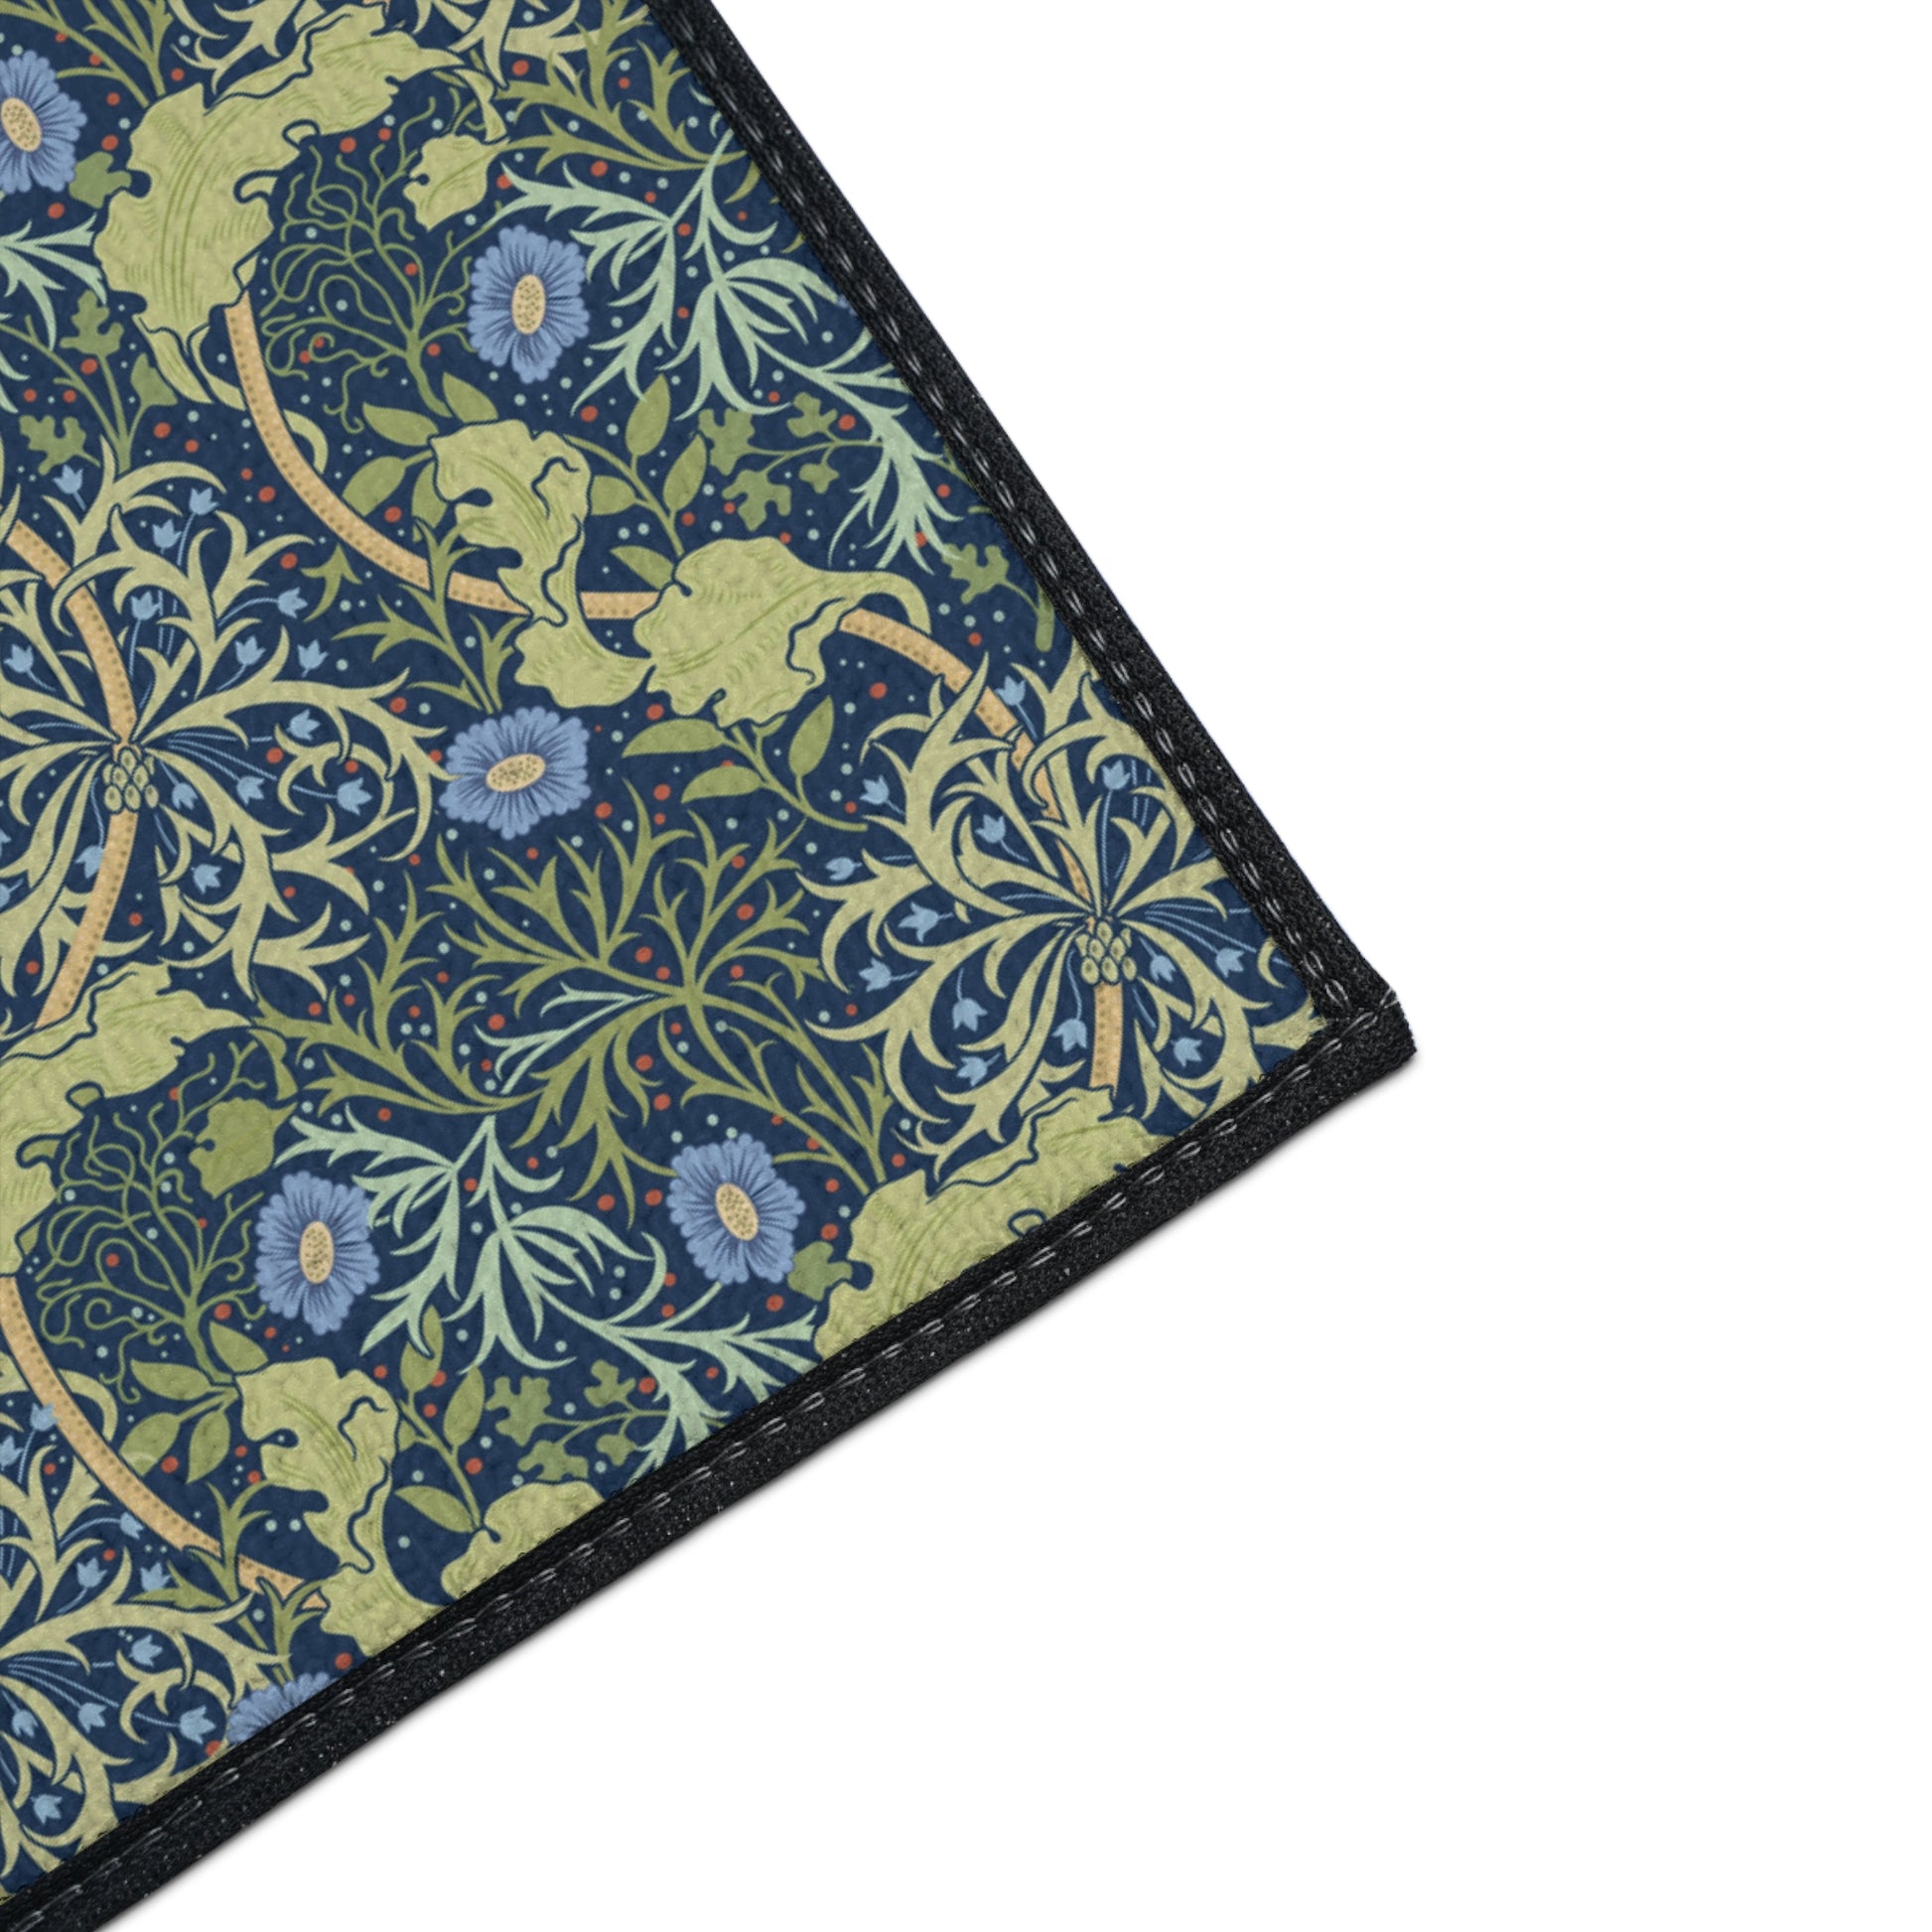 william-morris-co-heavy-duty-floor-mat-seaweed-collection-blue-flowers-18